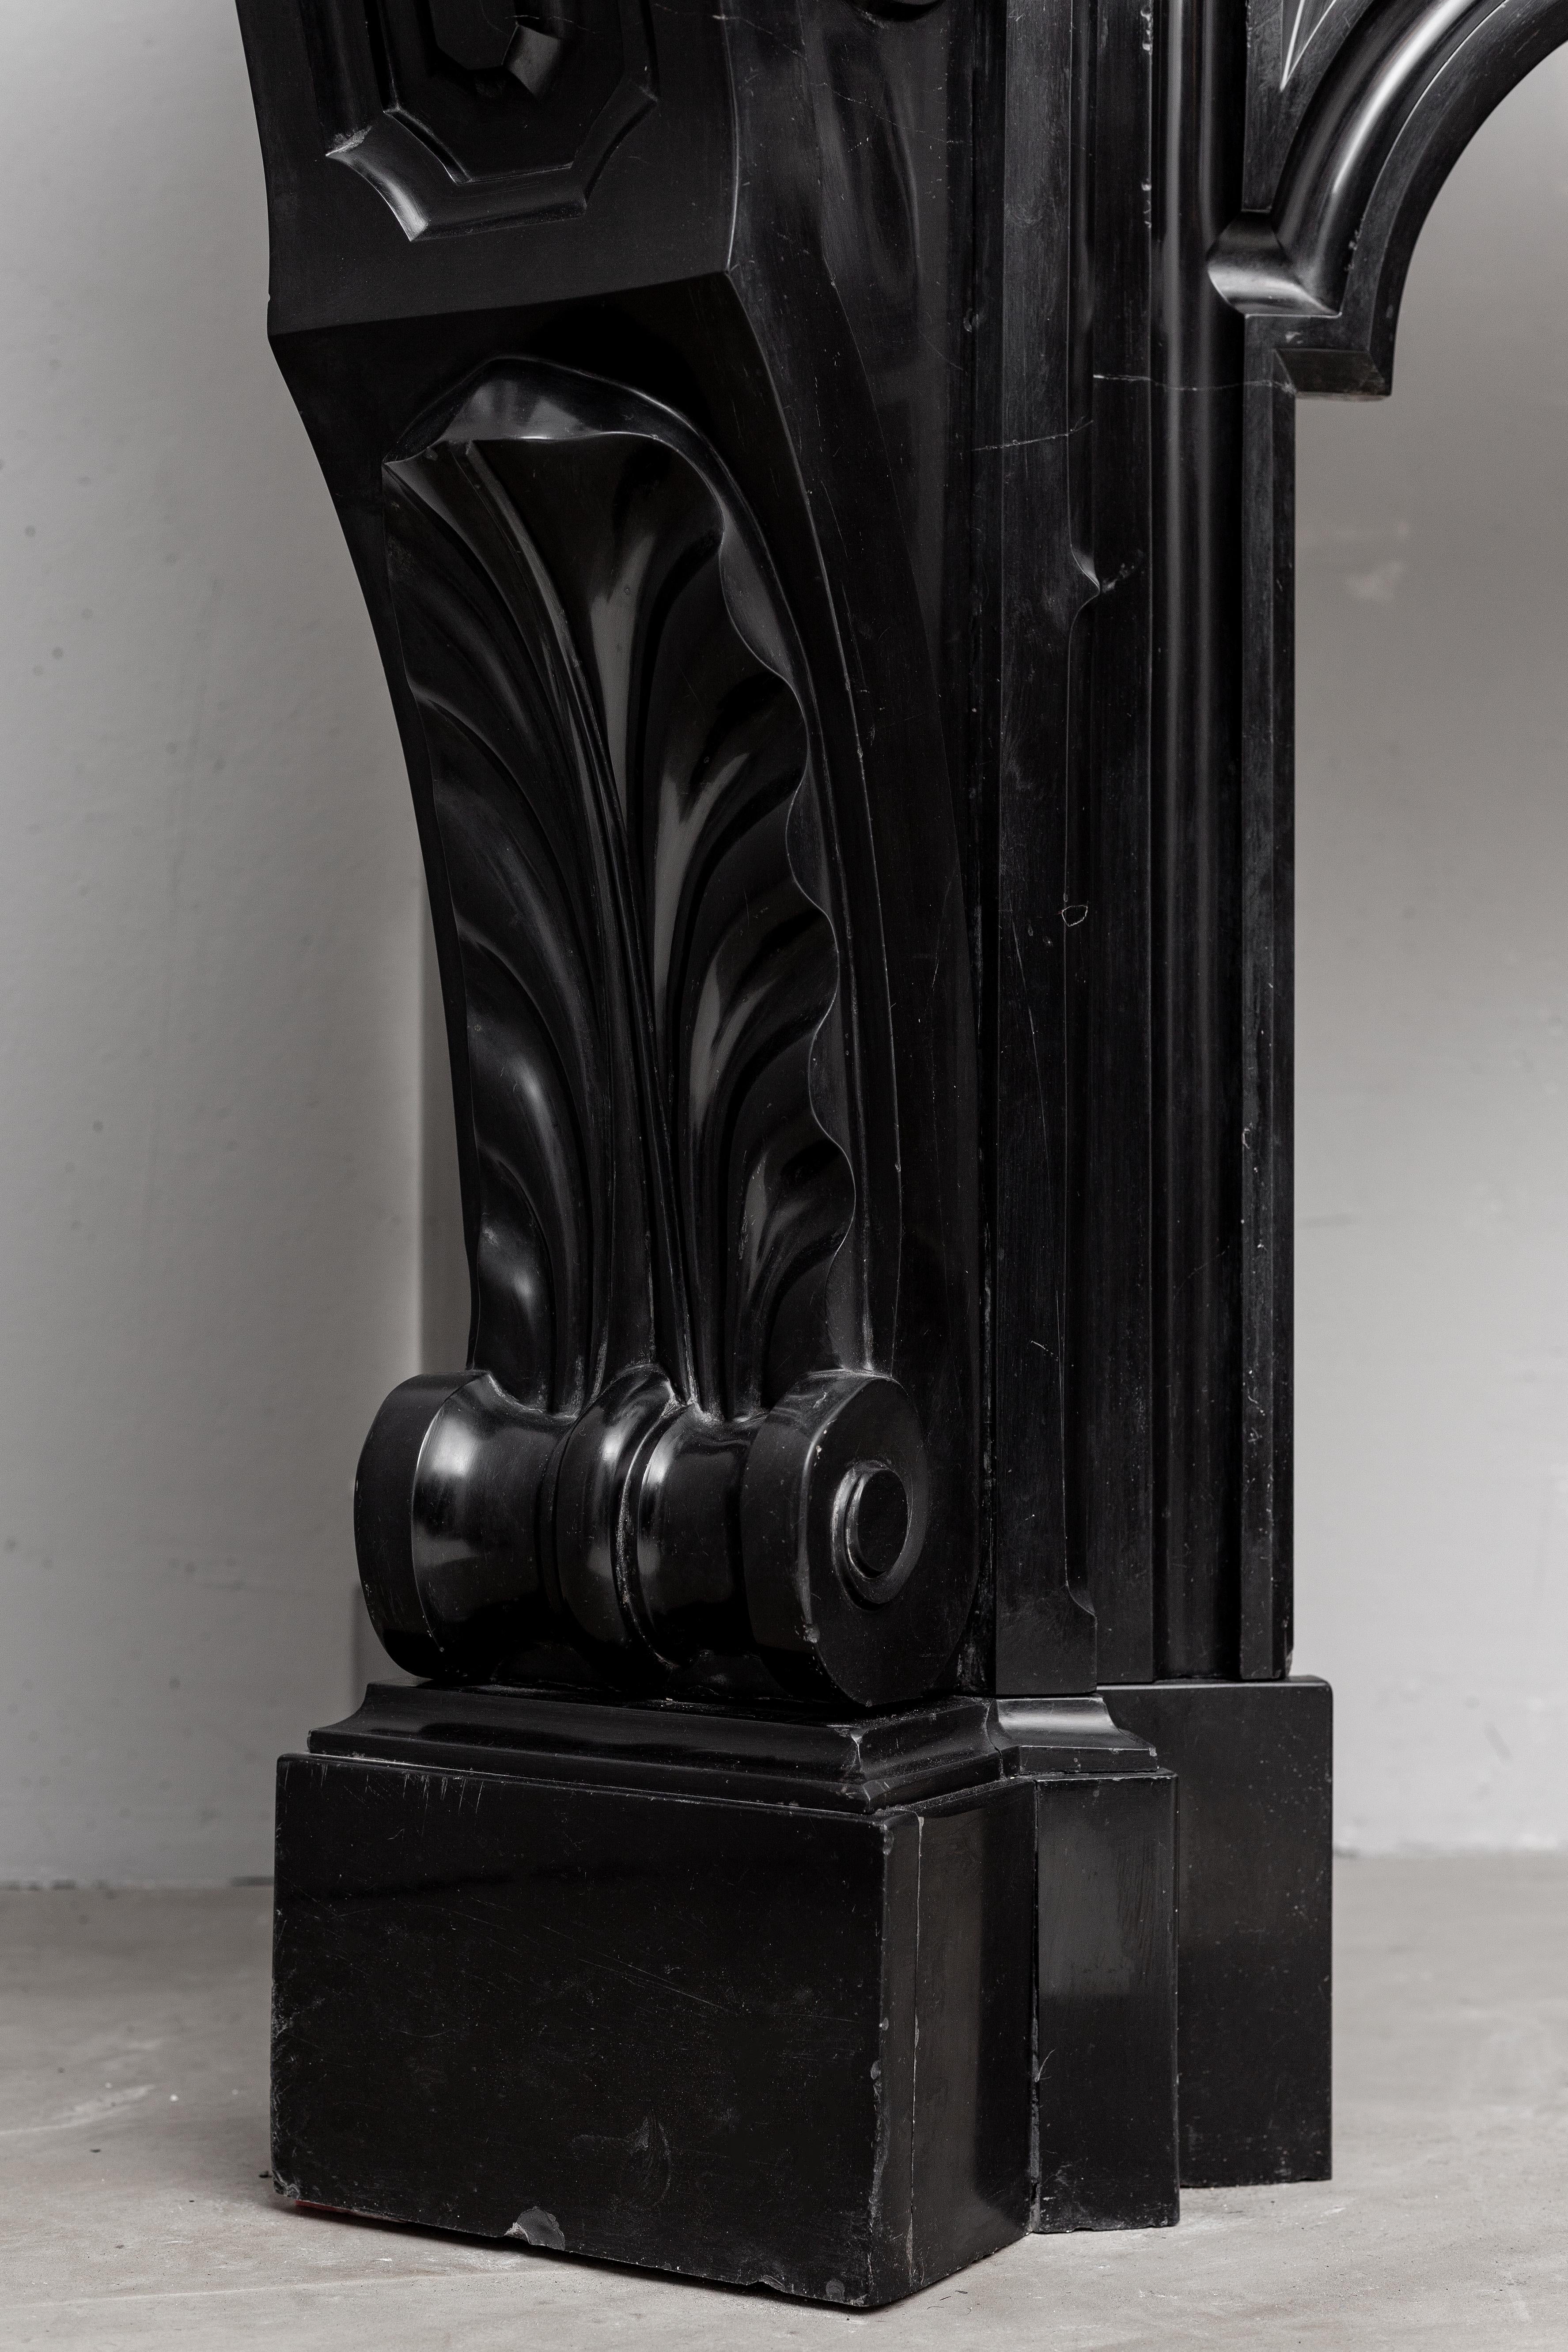 A magnificent marble fireplace wrapped in black marble: “Noir de Mazy”. An elegant combination of craftsmanship and distinctive styles. Everything about this mantelpiece is right, the round shapes of the decorated interior linteel make it a